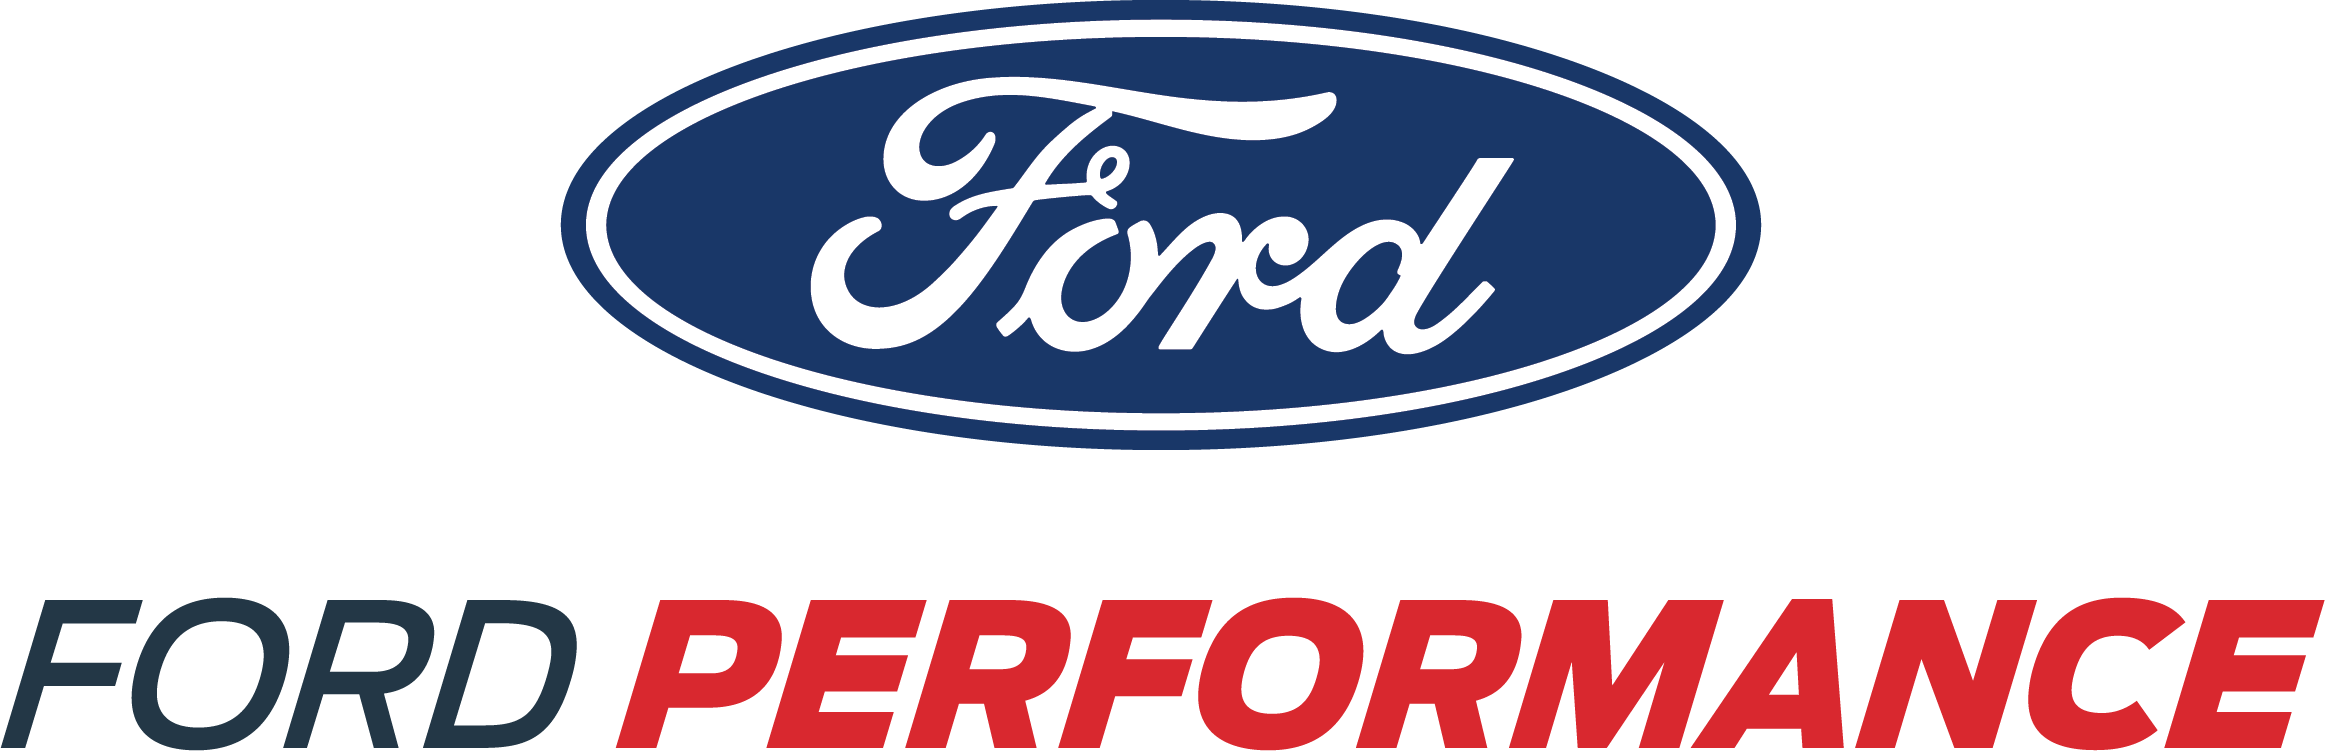 Ford Performance Homepage